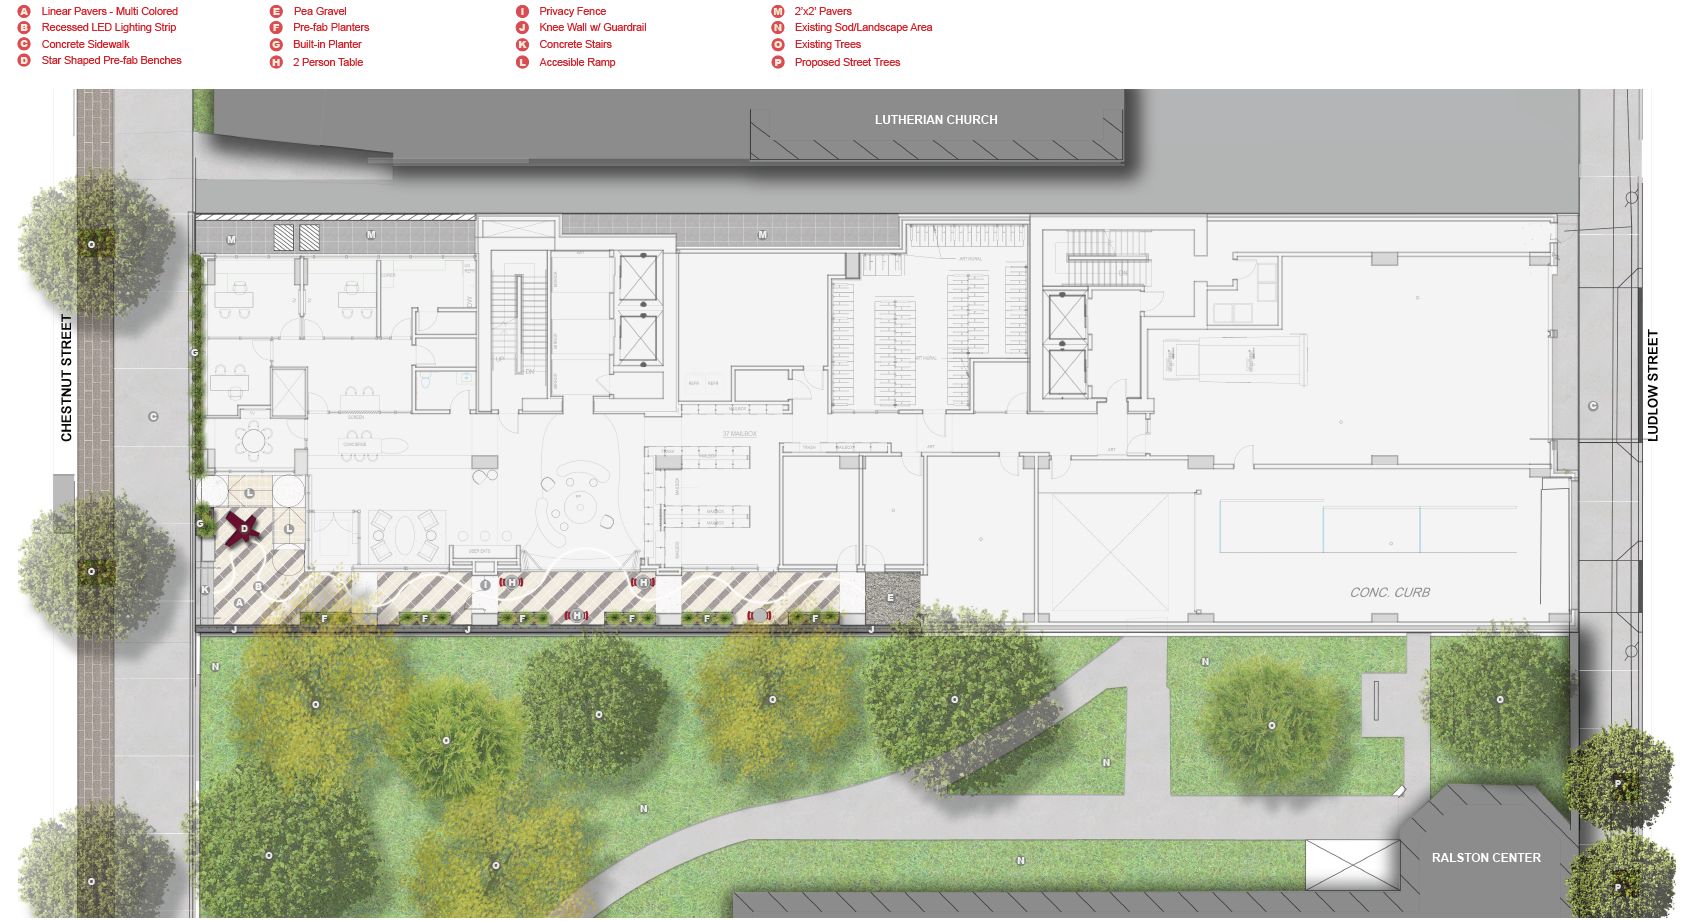 The Mark at 3615 Chestnut Street. Ground level plan. Credit: BKV Group via the Civic Design Review